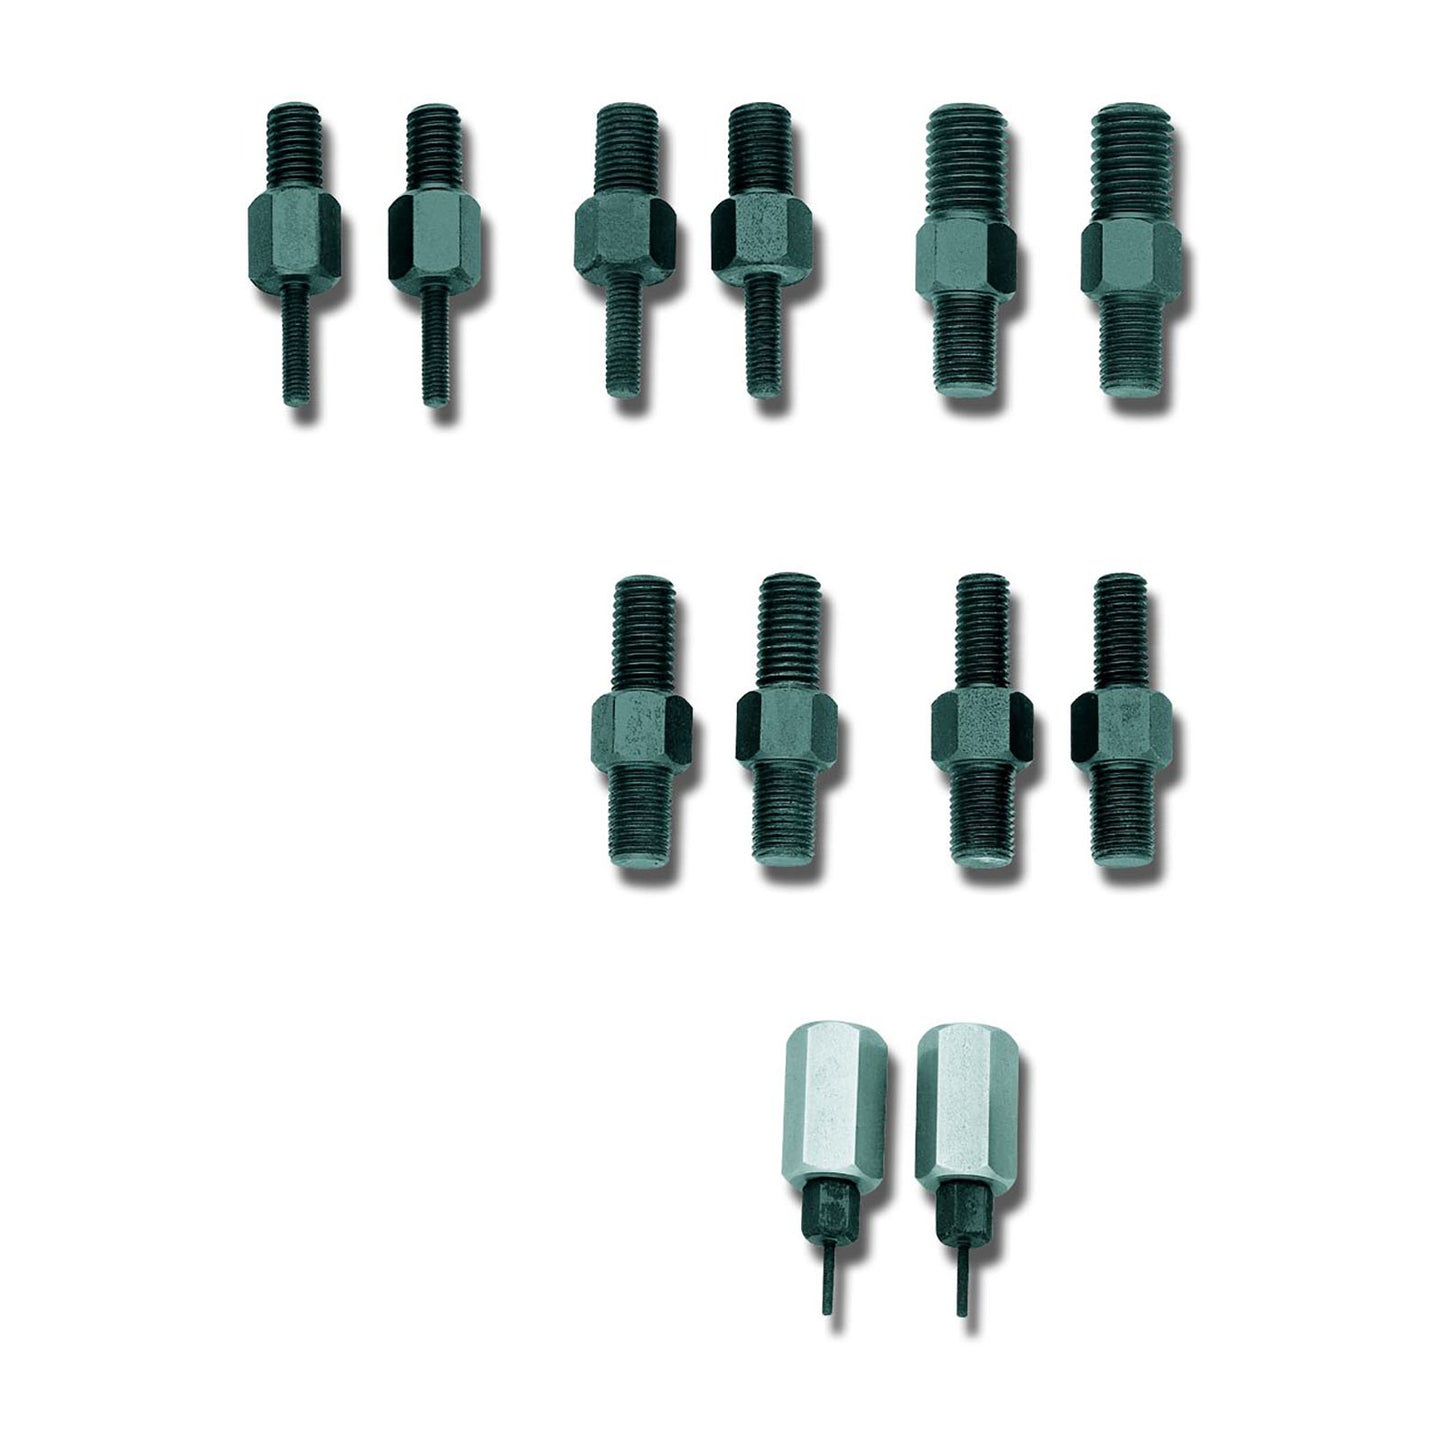 GEDORE 1.81/10 - M10 threaded adapters (1120735)